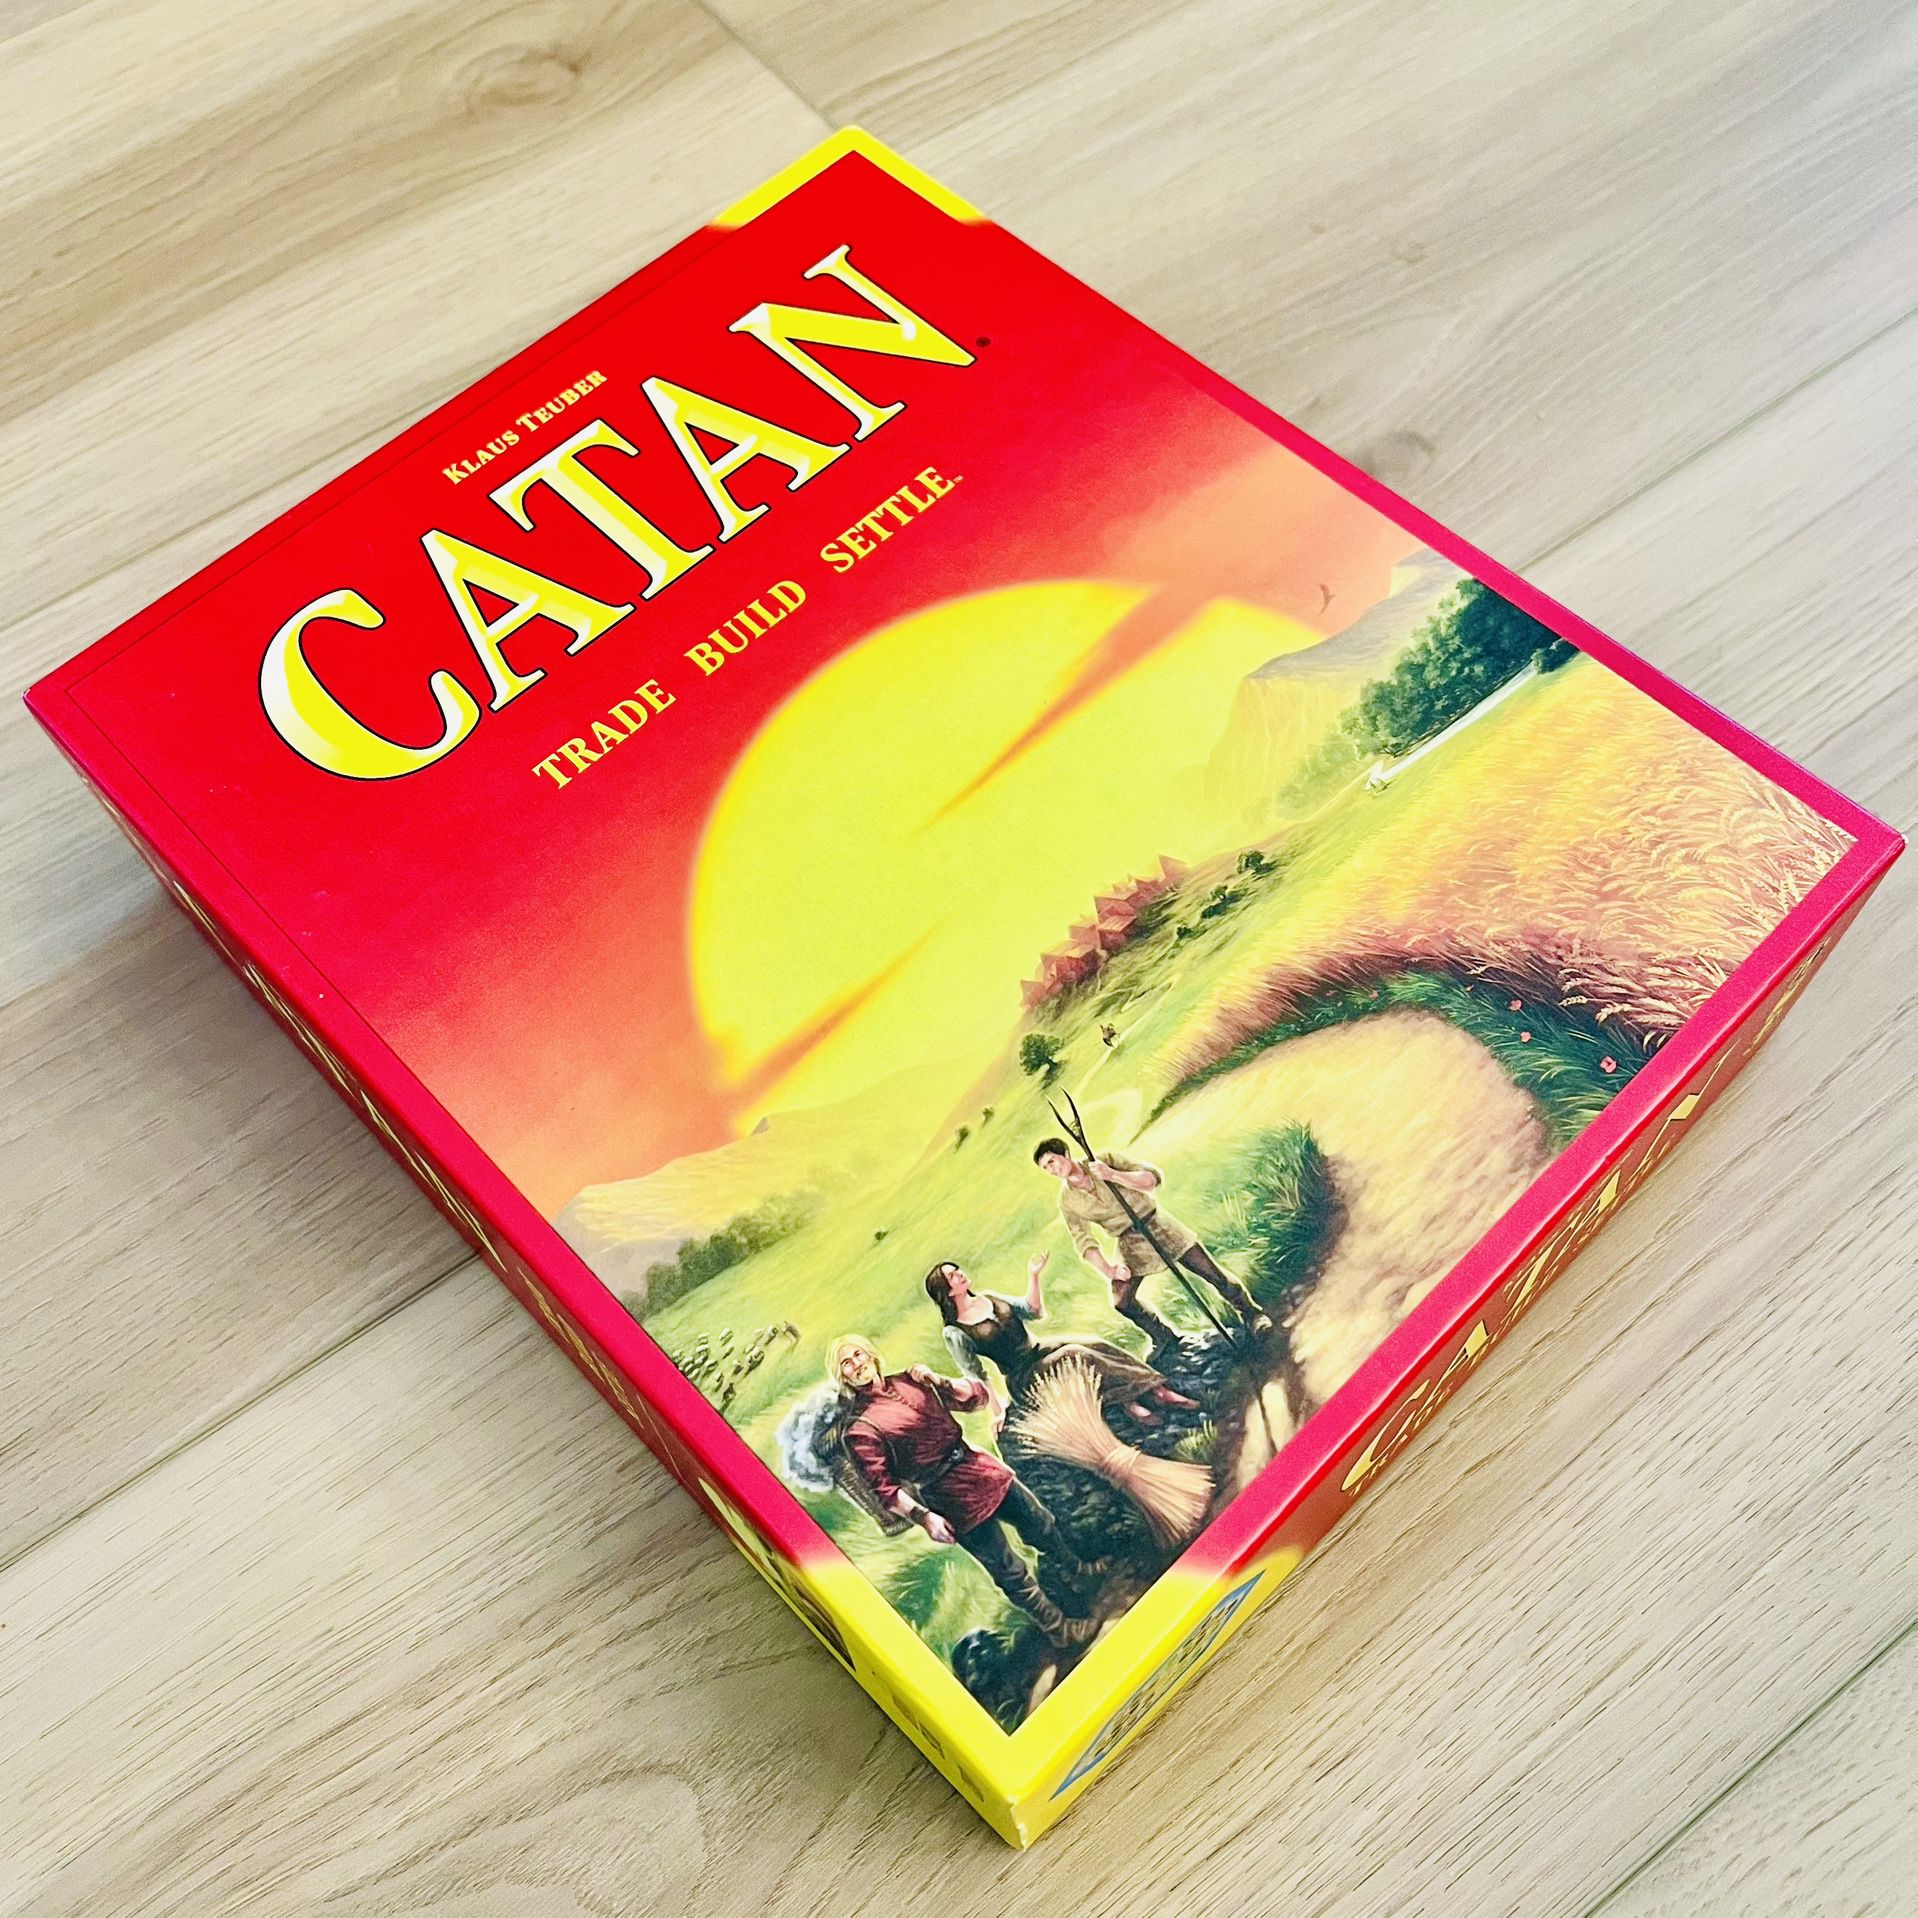 Settlers Of Catan Family Board Game Great for Game Night w/ Kids Adults & All